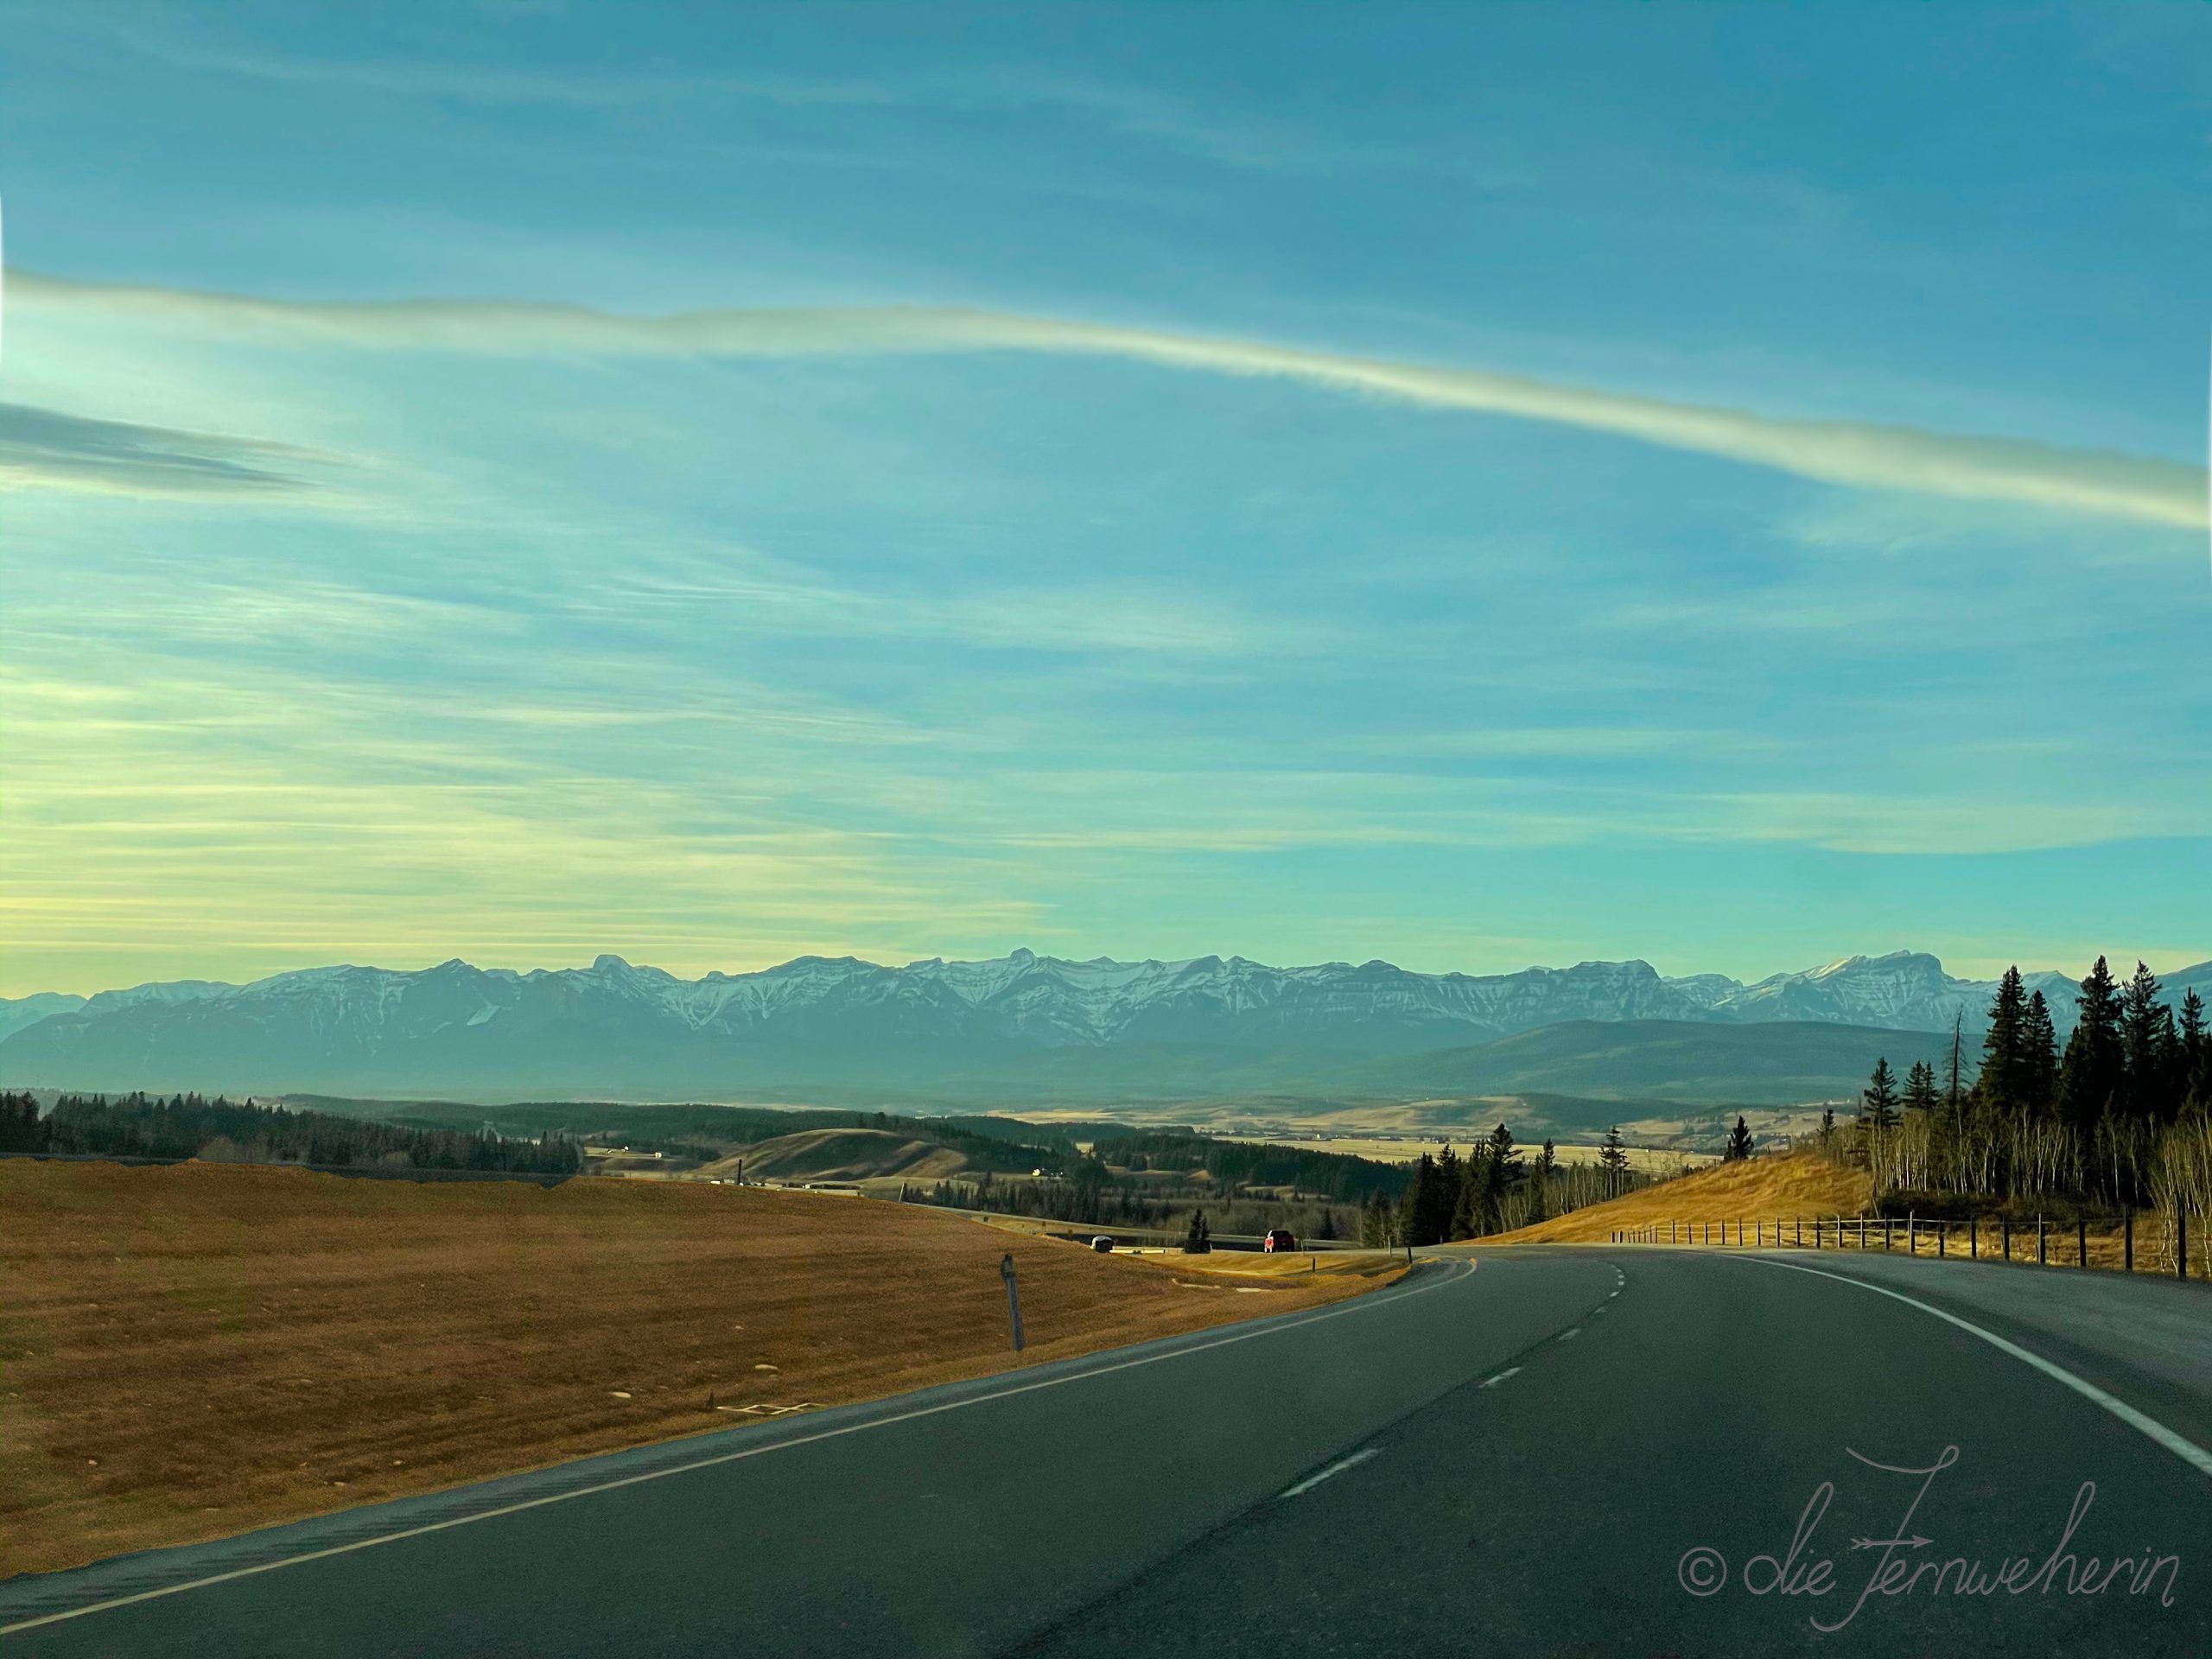 Highway 1 WB heading from Calgary, Alberta towards Banff National Park, as the sun starts to set.